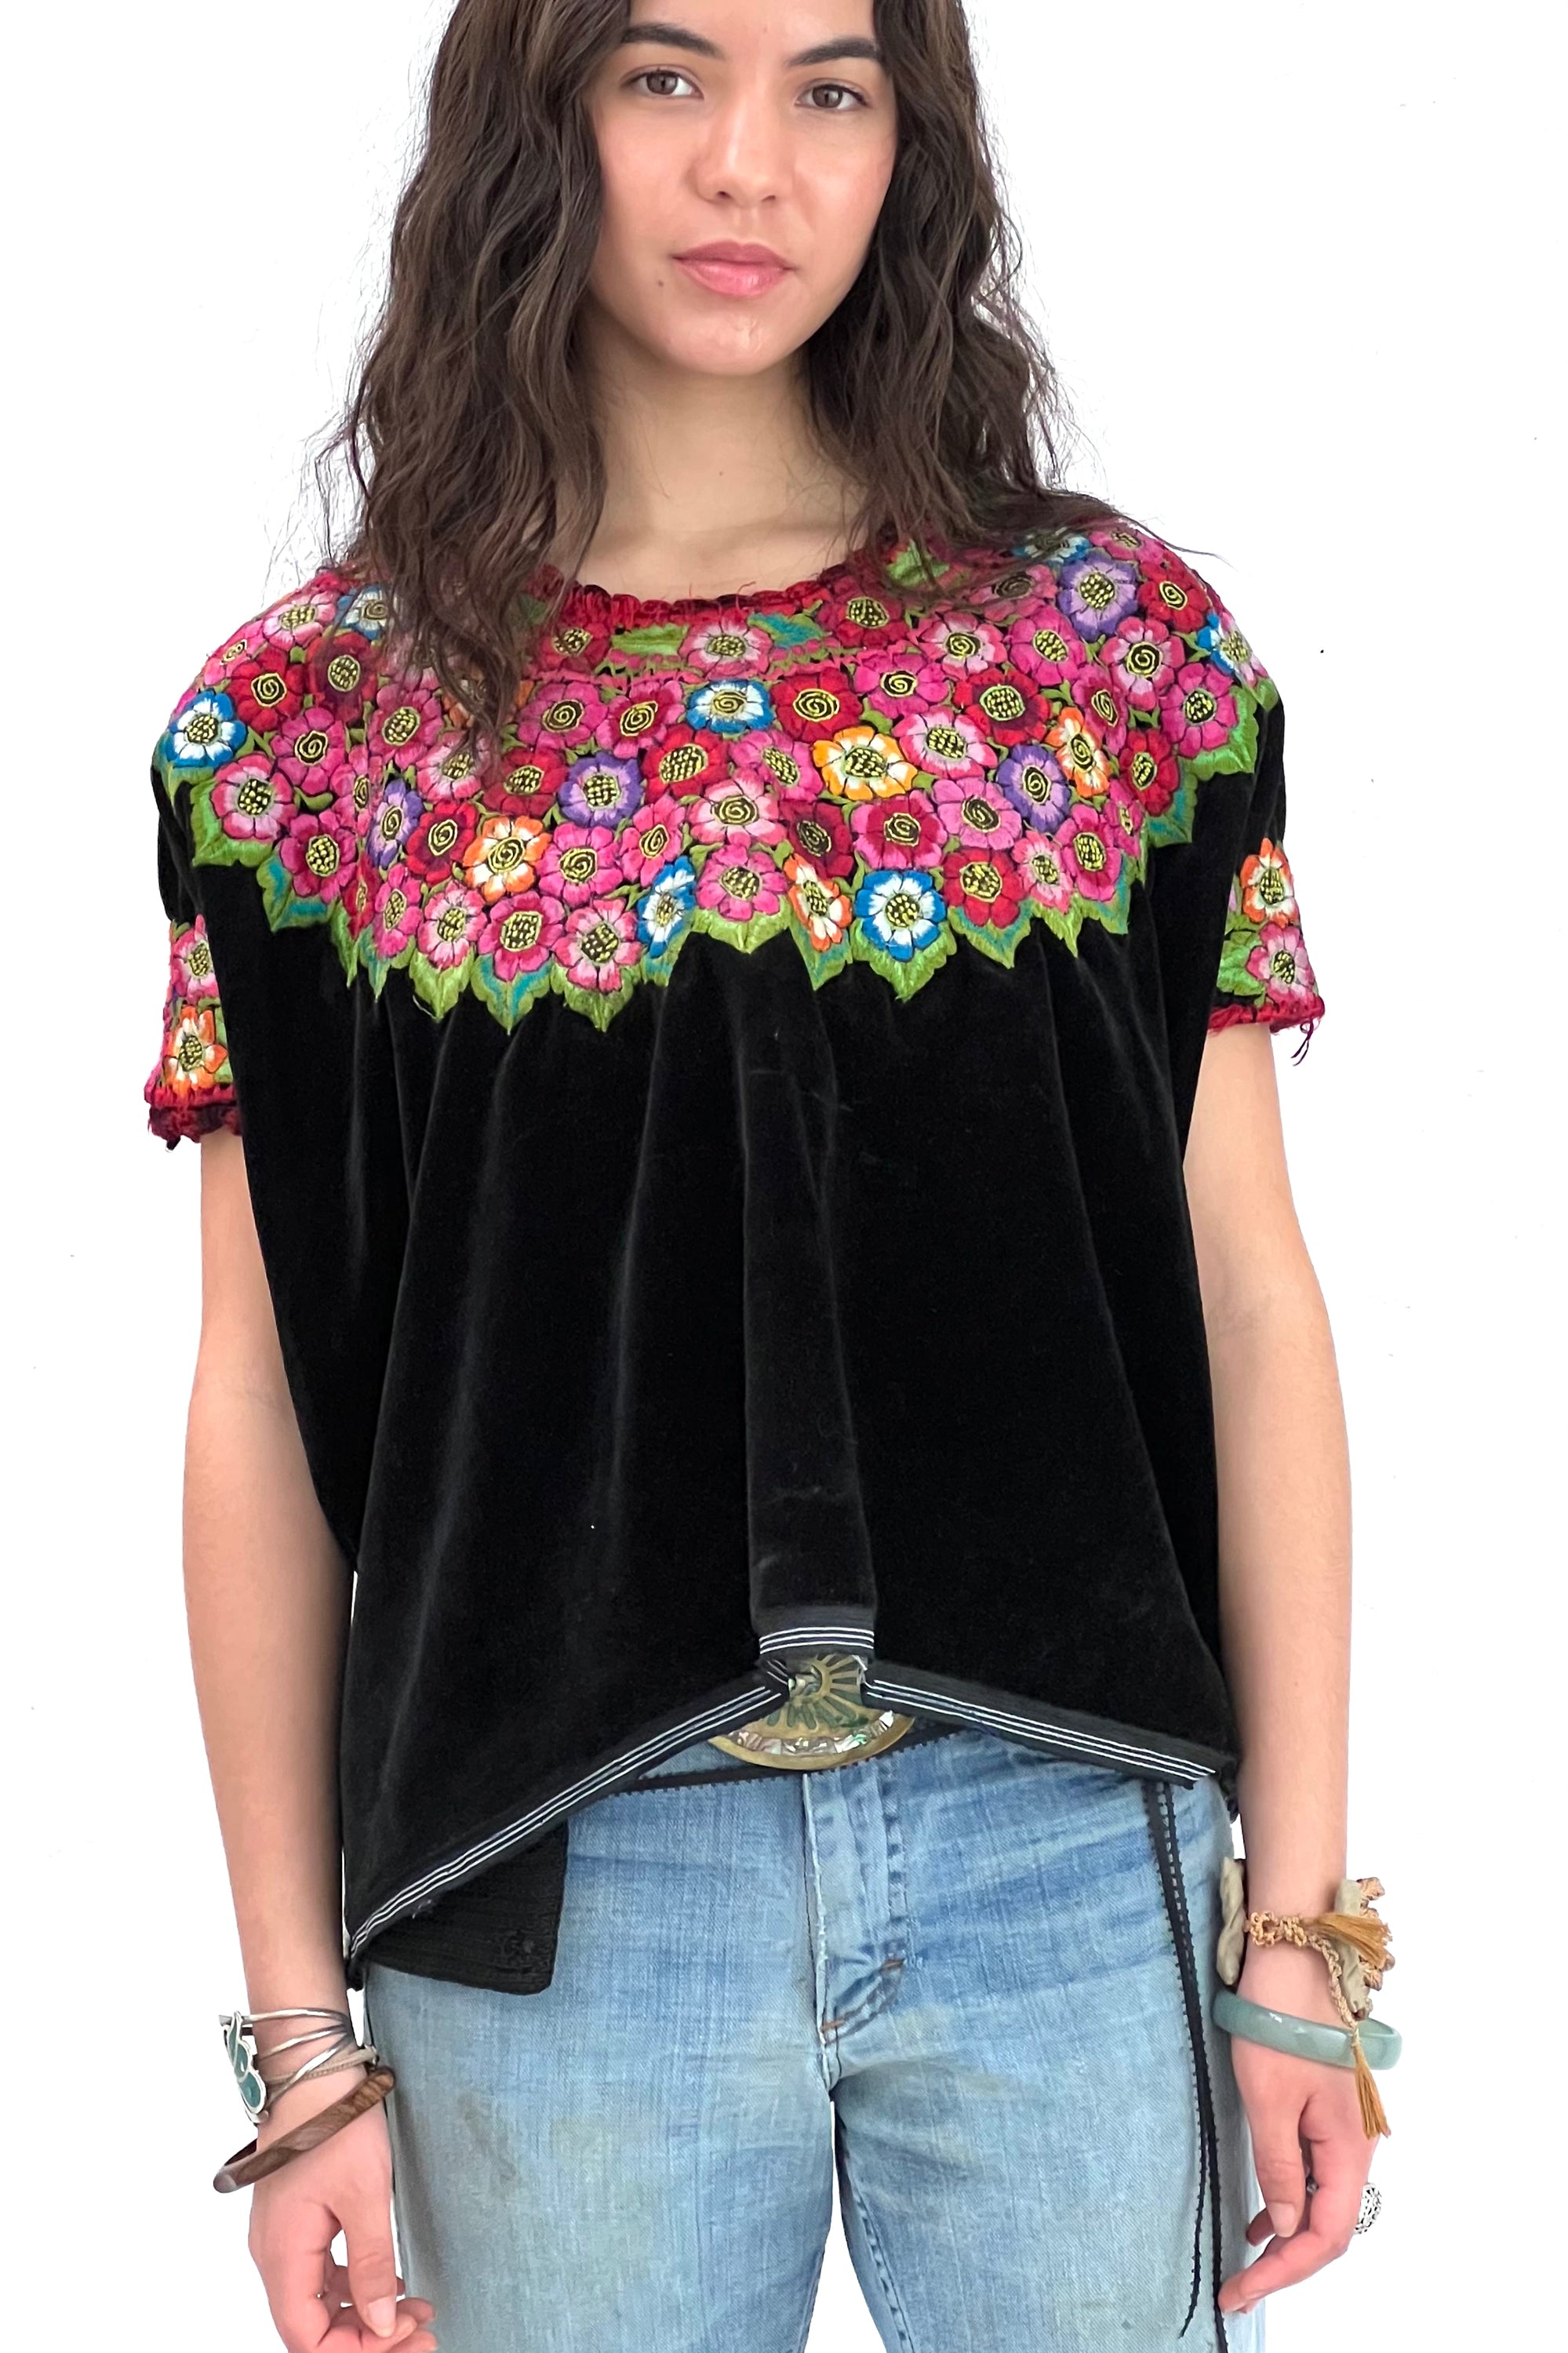 Vintage Embroidered Velvet Top Selected by Anna Corinna